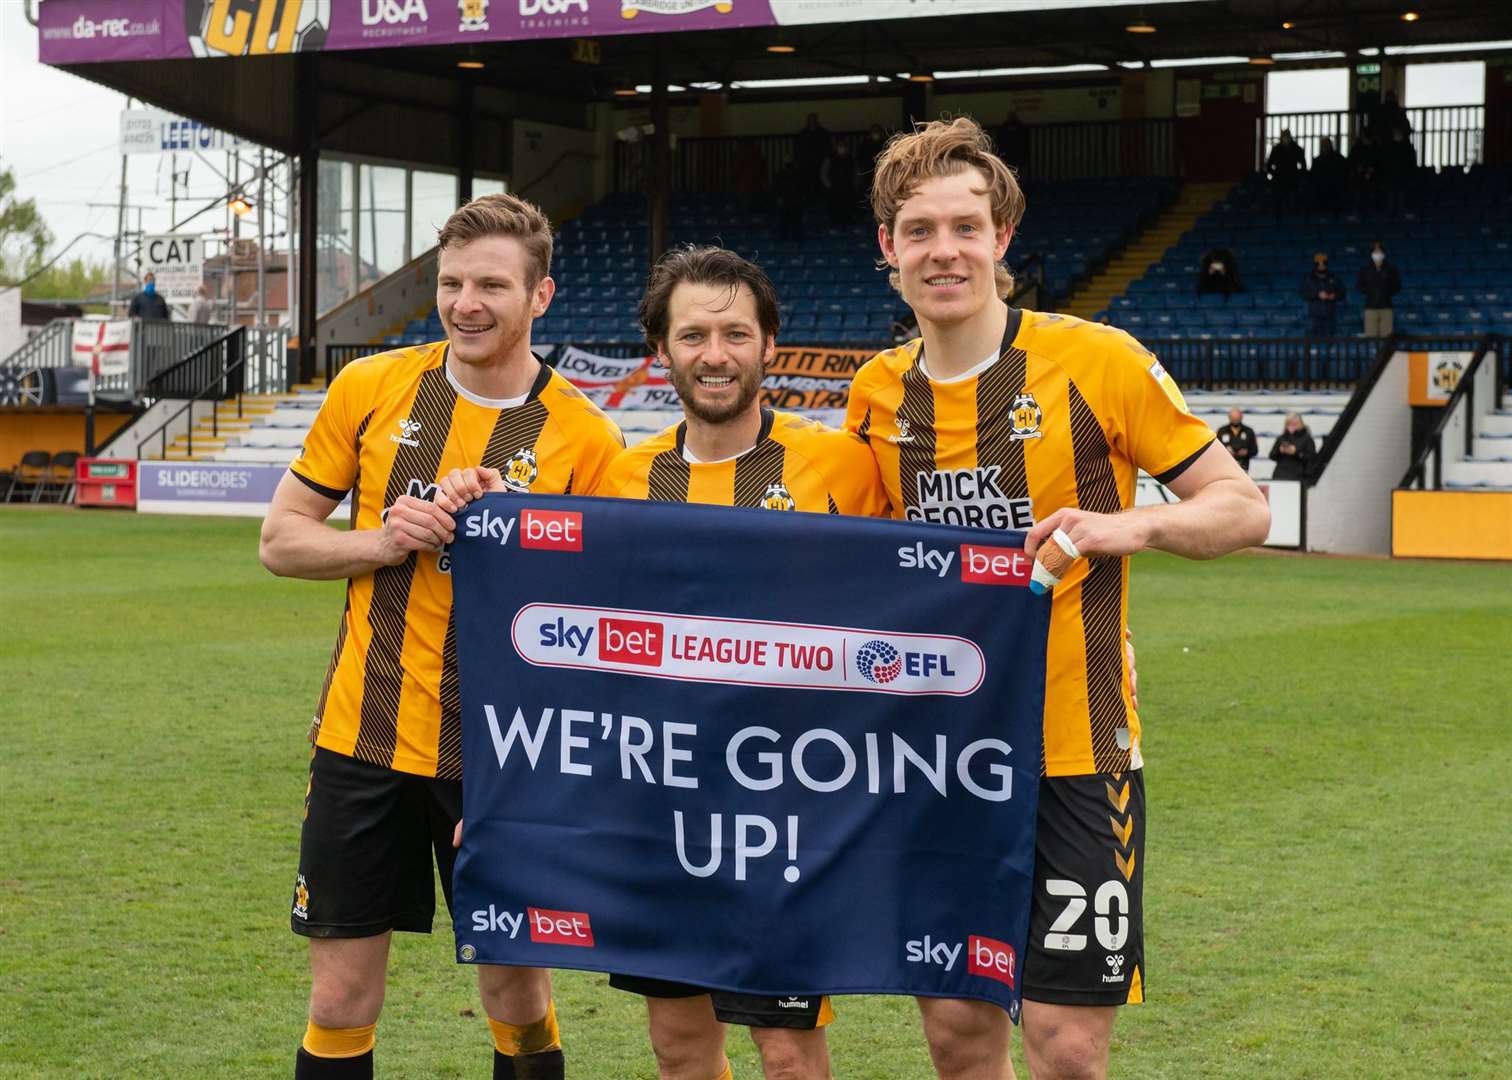 Goals from Paul Mullin (left) were key for Cambridge United as they won promotion last season but they won't have his services this time around Picture: Simon Lankester